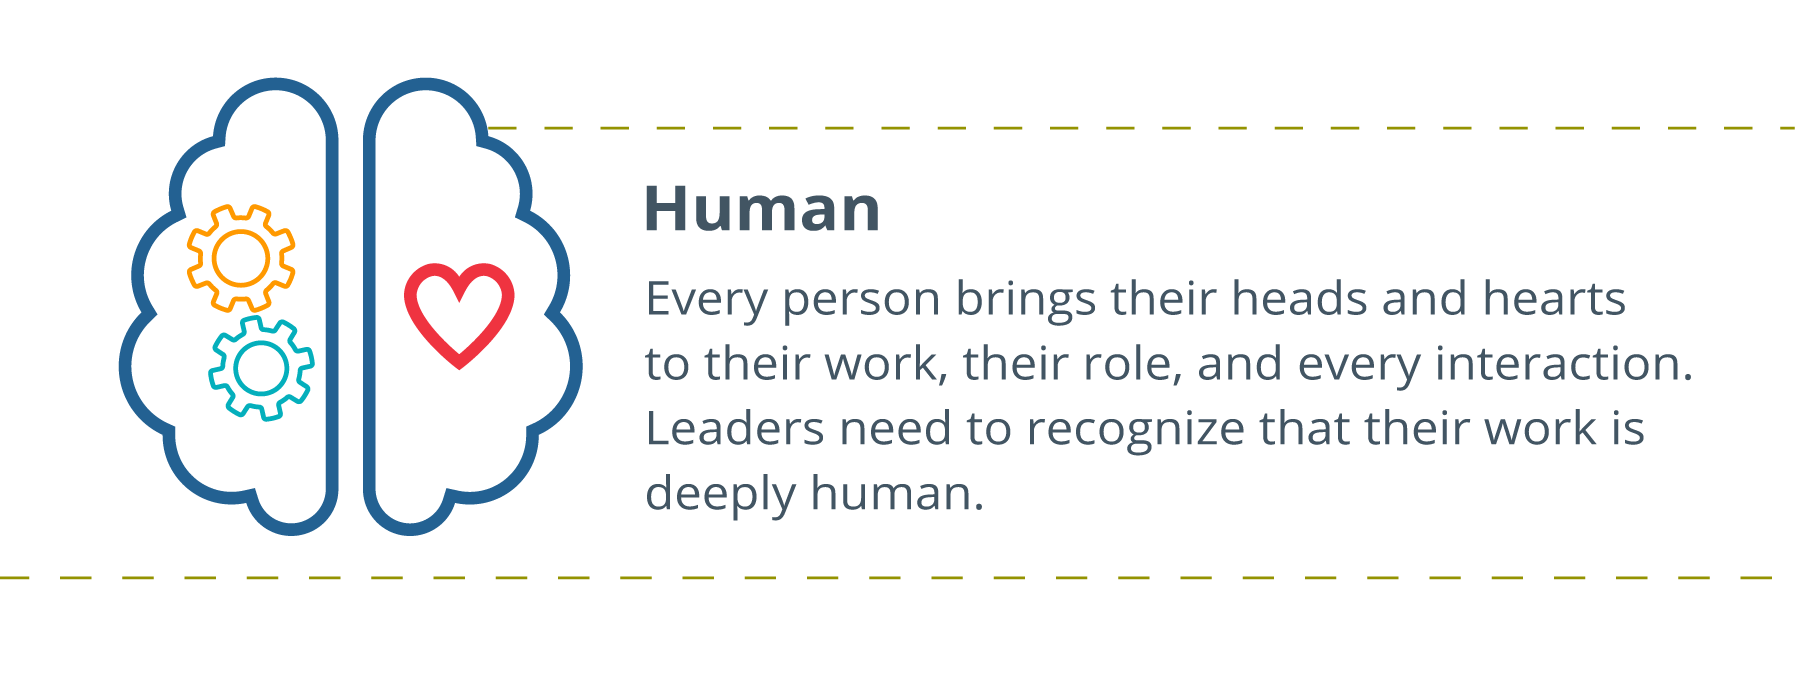 two halves of the outlines of the brain are shown, to the left the outline is filled with gears, and to the right, the outline has a heart in it, written to the right: Human: Every person brings their heads and hearts to their work, their role, and every interaction. Leaders need to recognize that their work is deeply human.